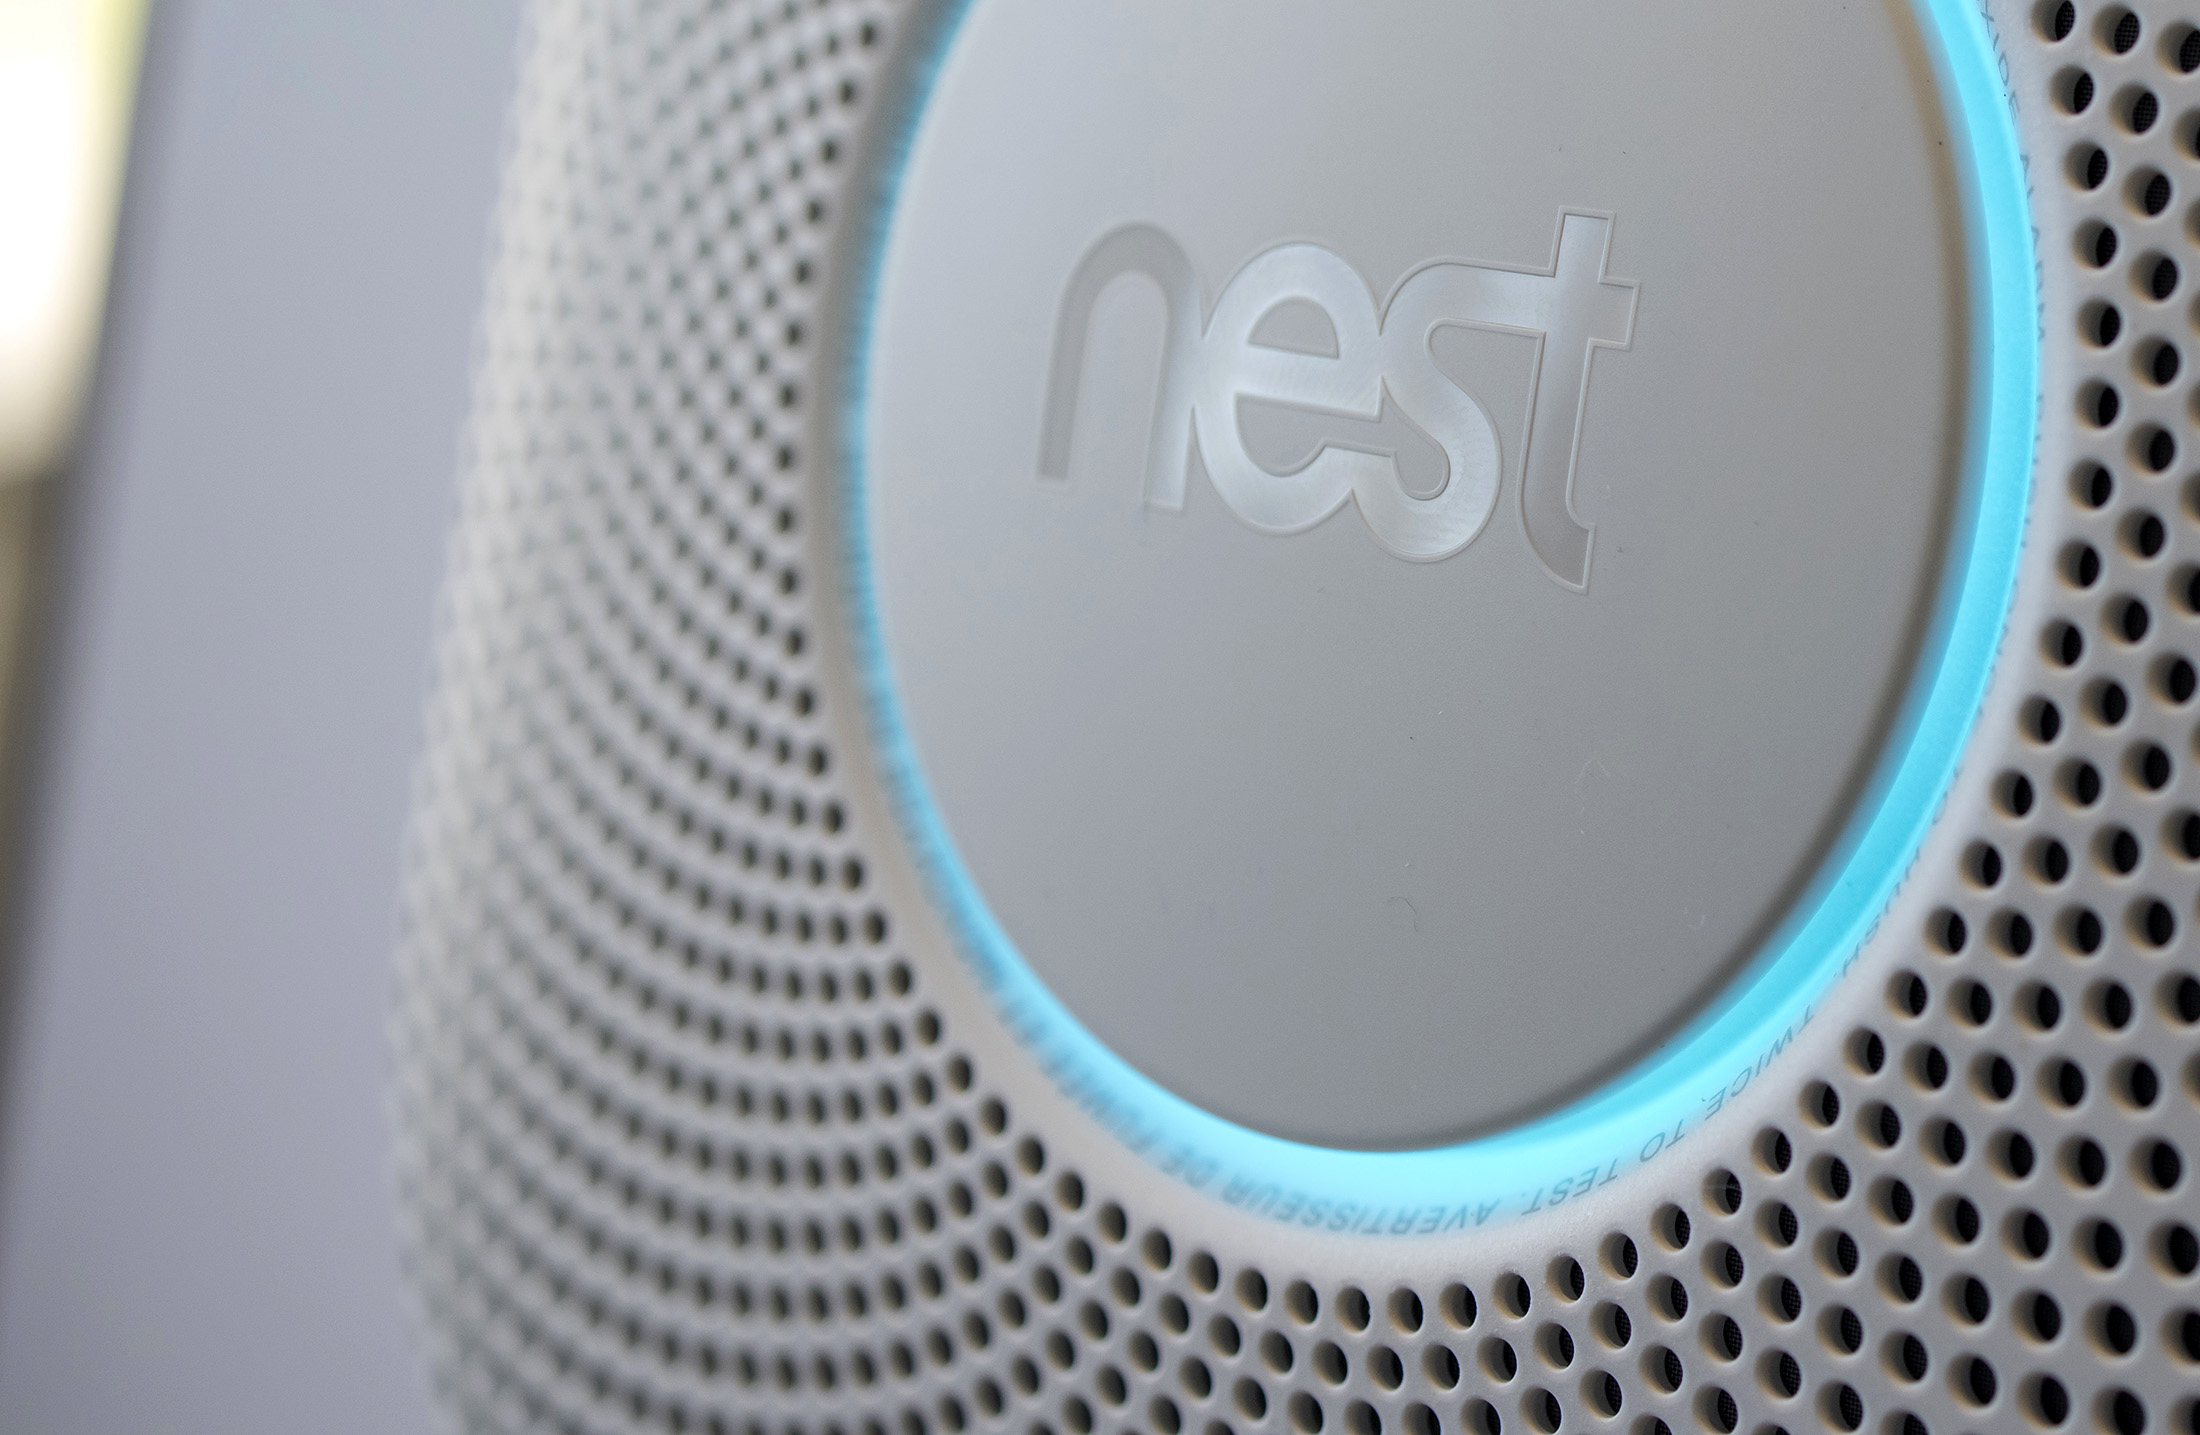 The Nest Labs Inc. Protect device.
